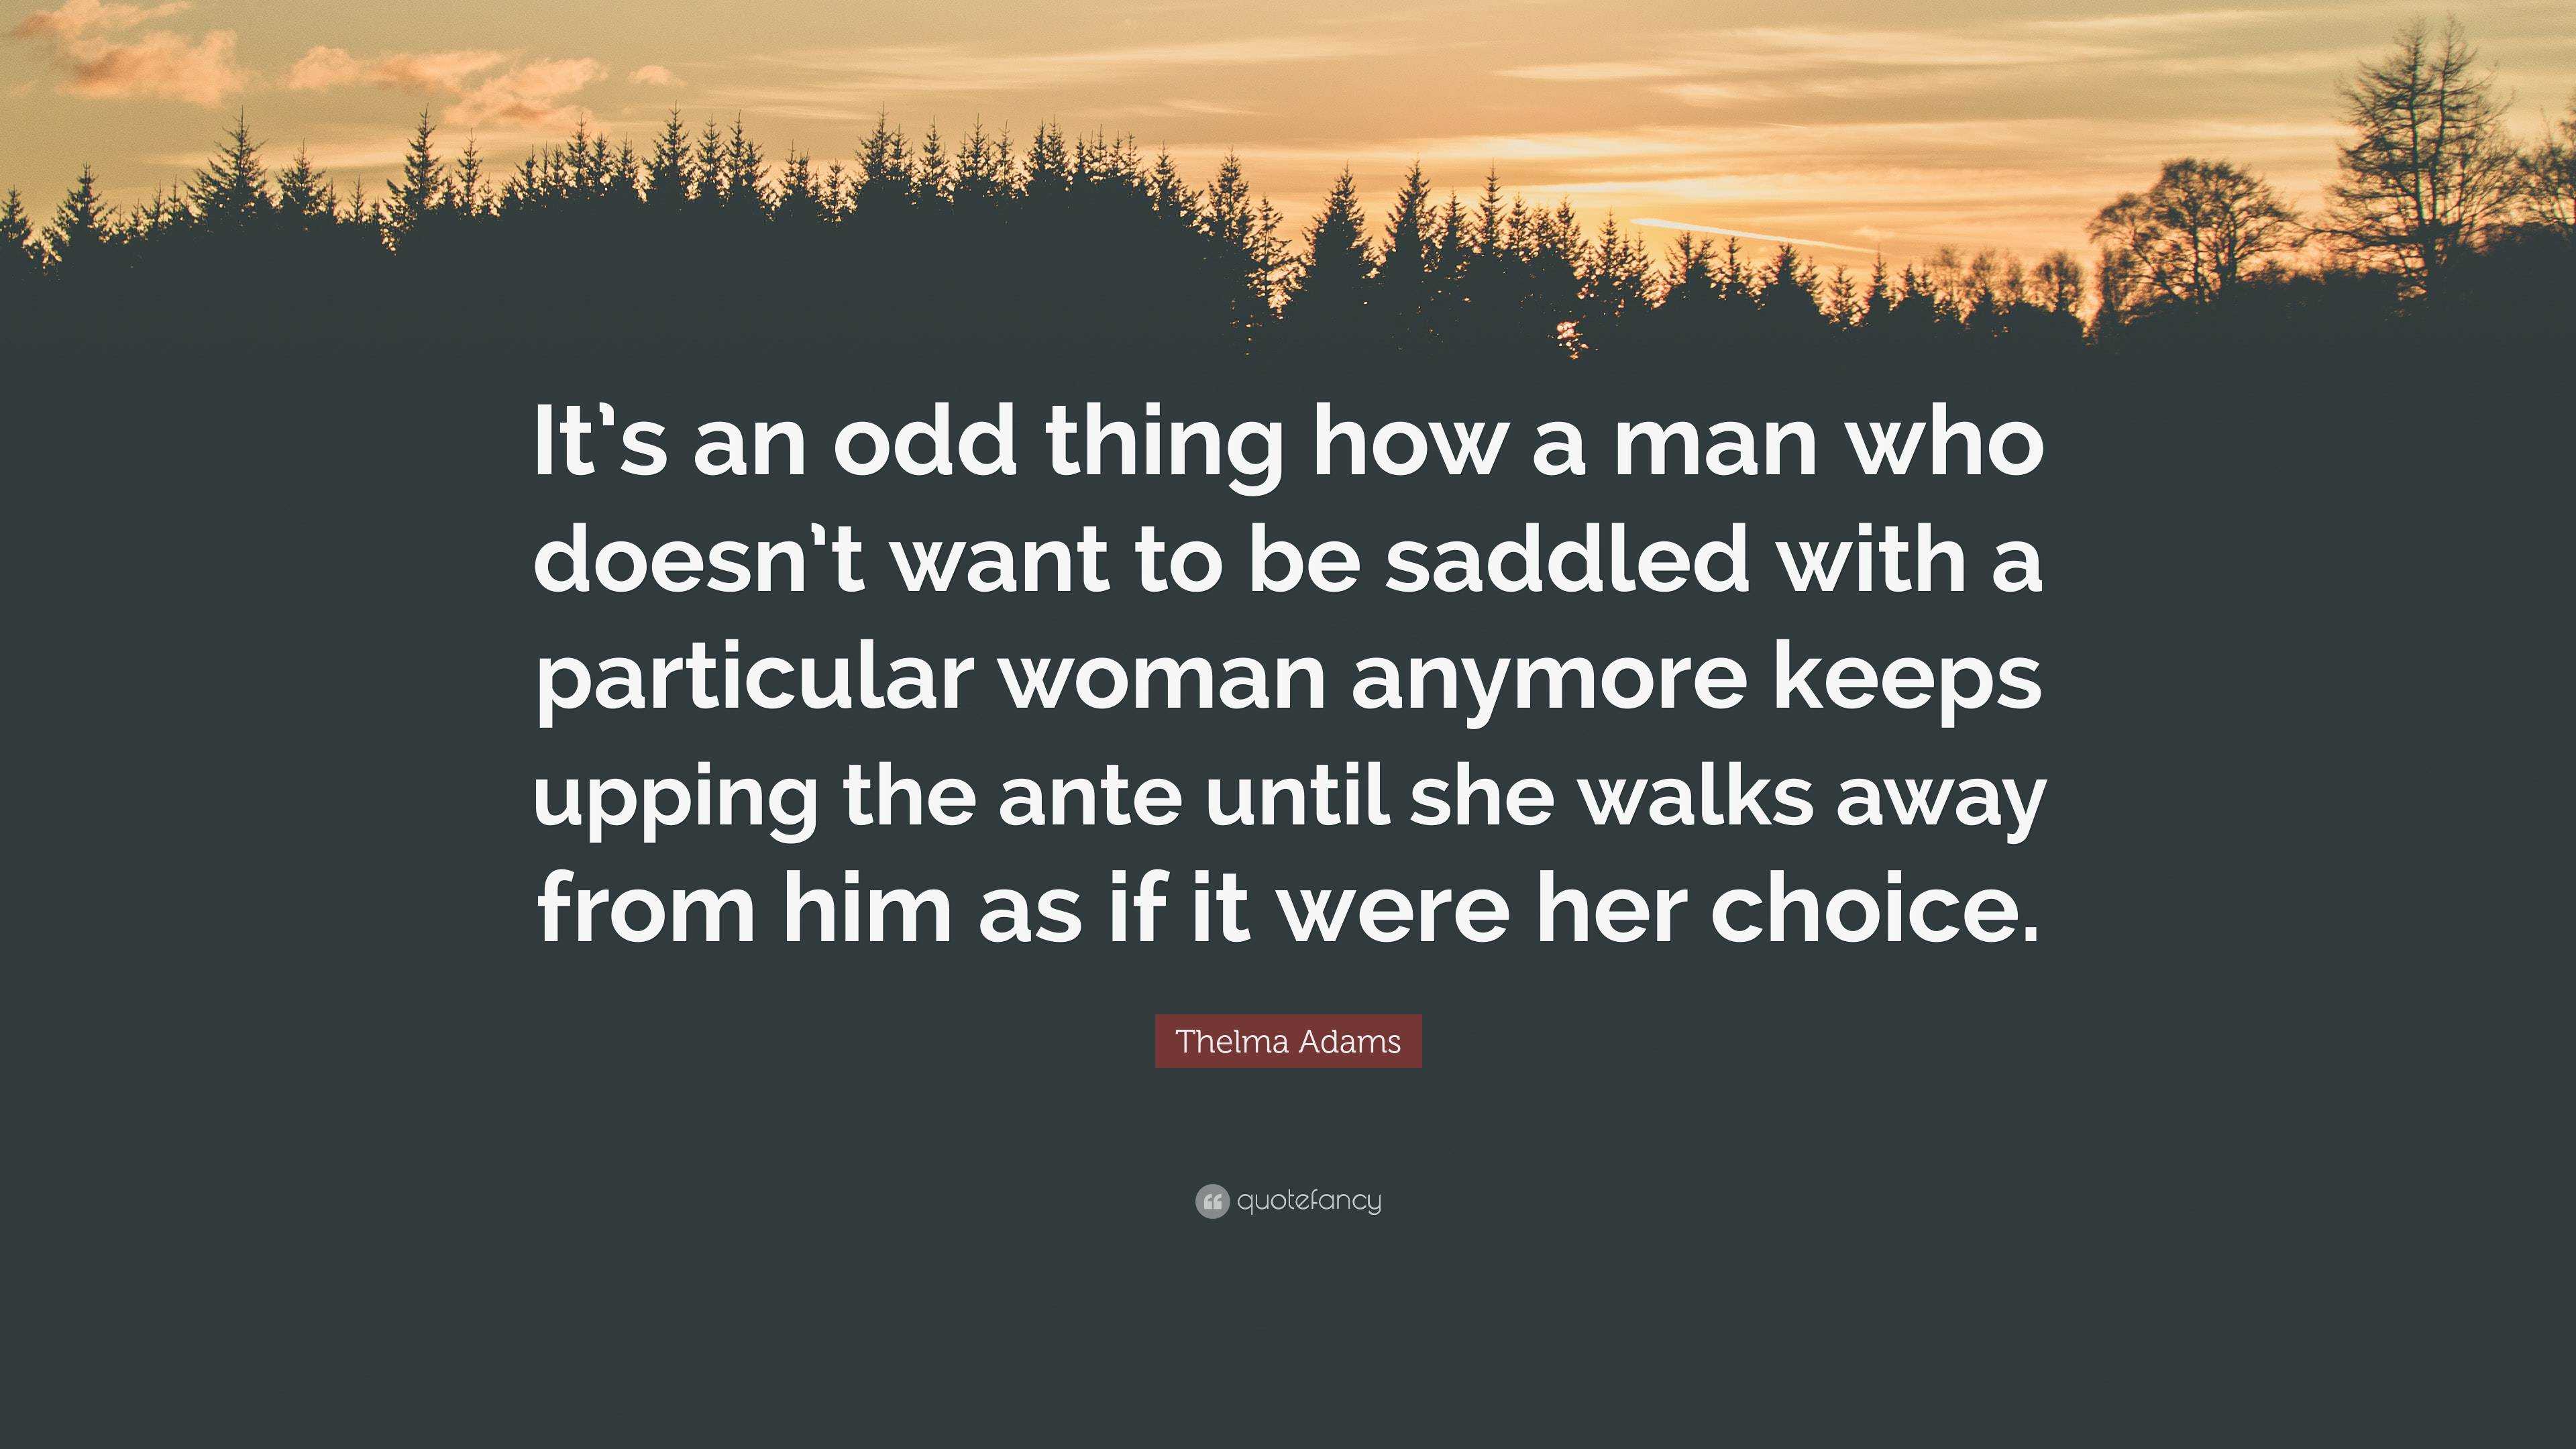 Thelma Adams Quote “its An Odd Thing How A Man Who Doesnt Want To Be Saddled With A